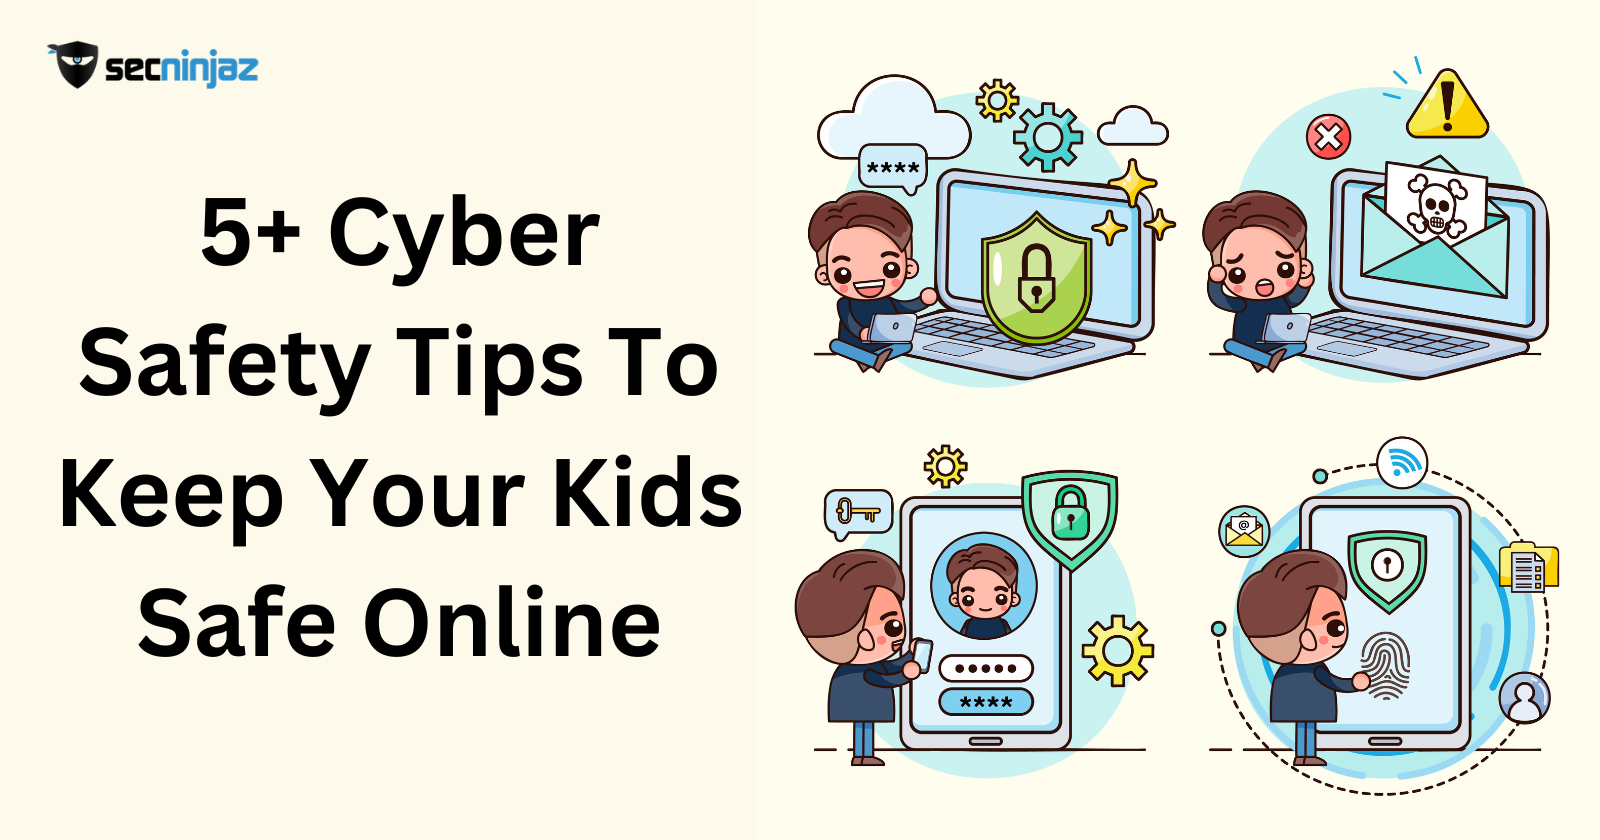 Want to keep your little ones cyber-safe? Learn these tools 👾  #CyberSecurityAwarenessMonth, Theta (NZ) posted on the topic